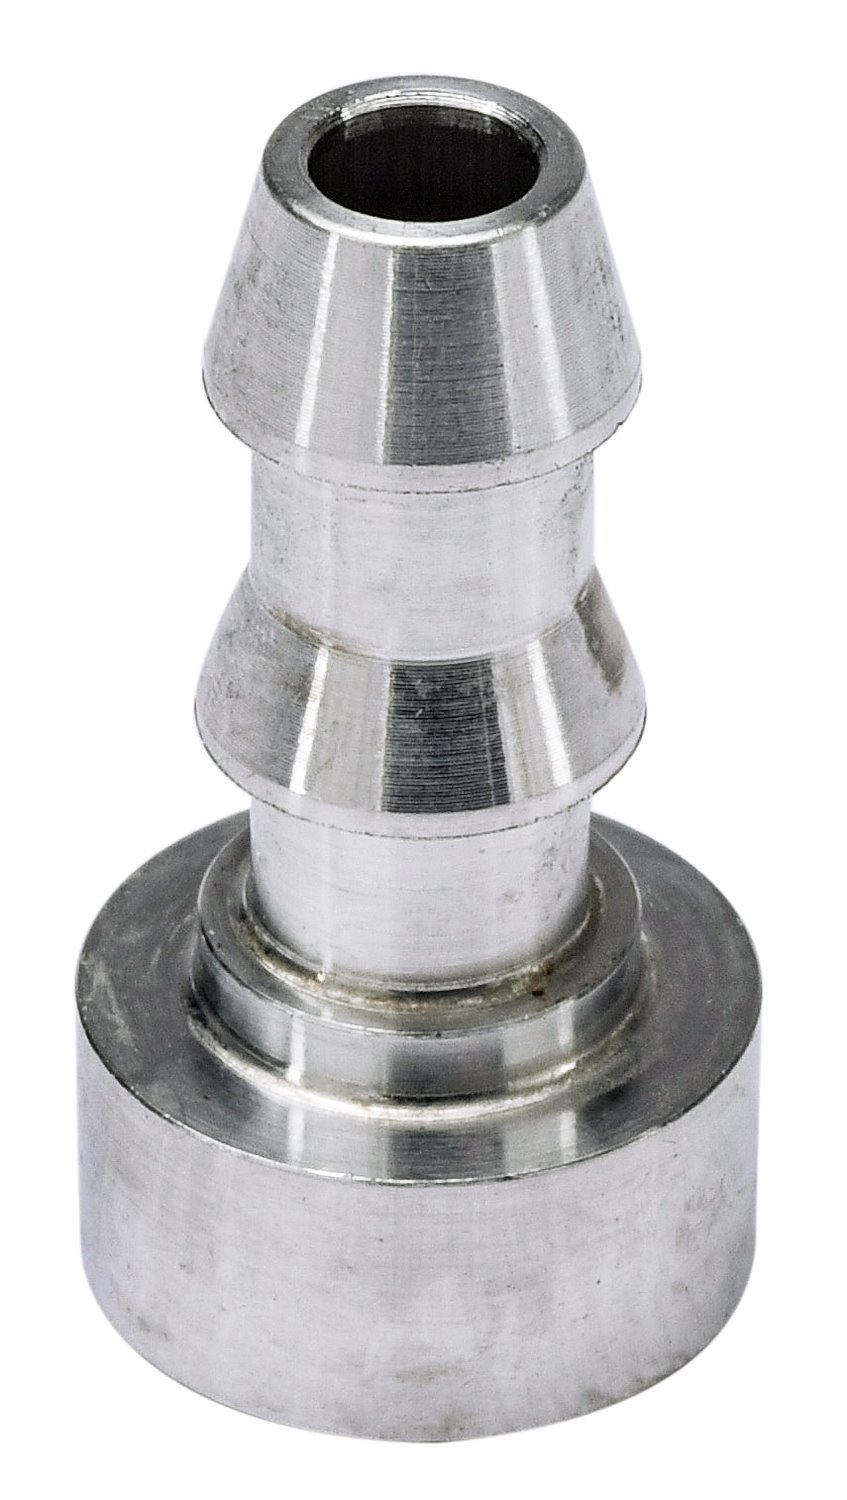 Weld-On Hose Barb Fitting with 1/4 in. Hose Barb [Aluminum]